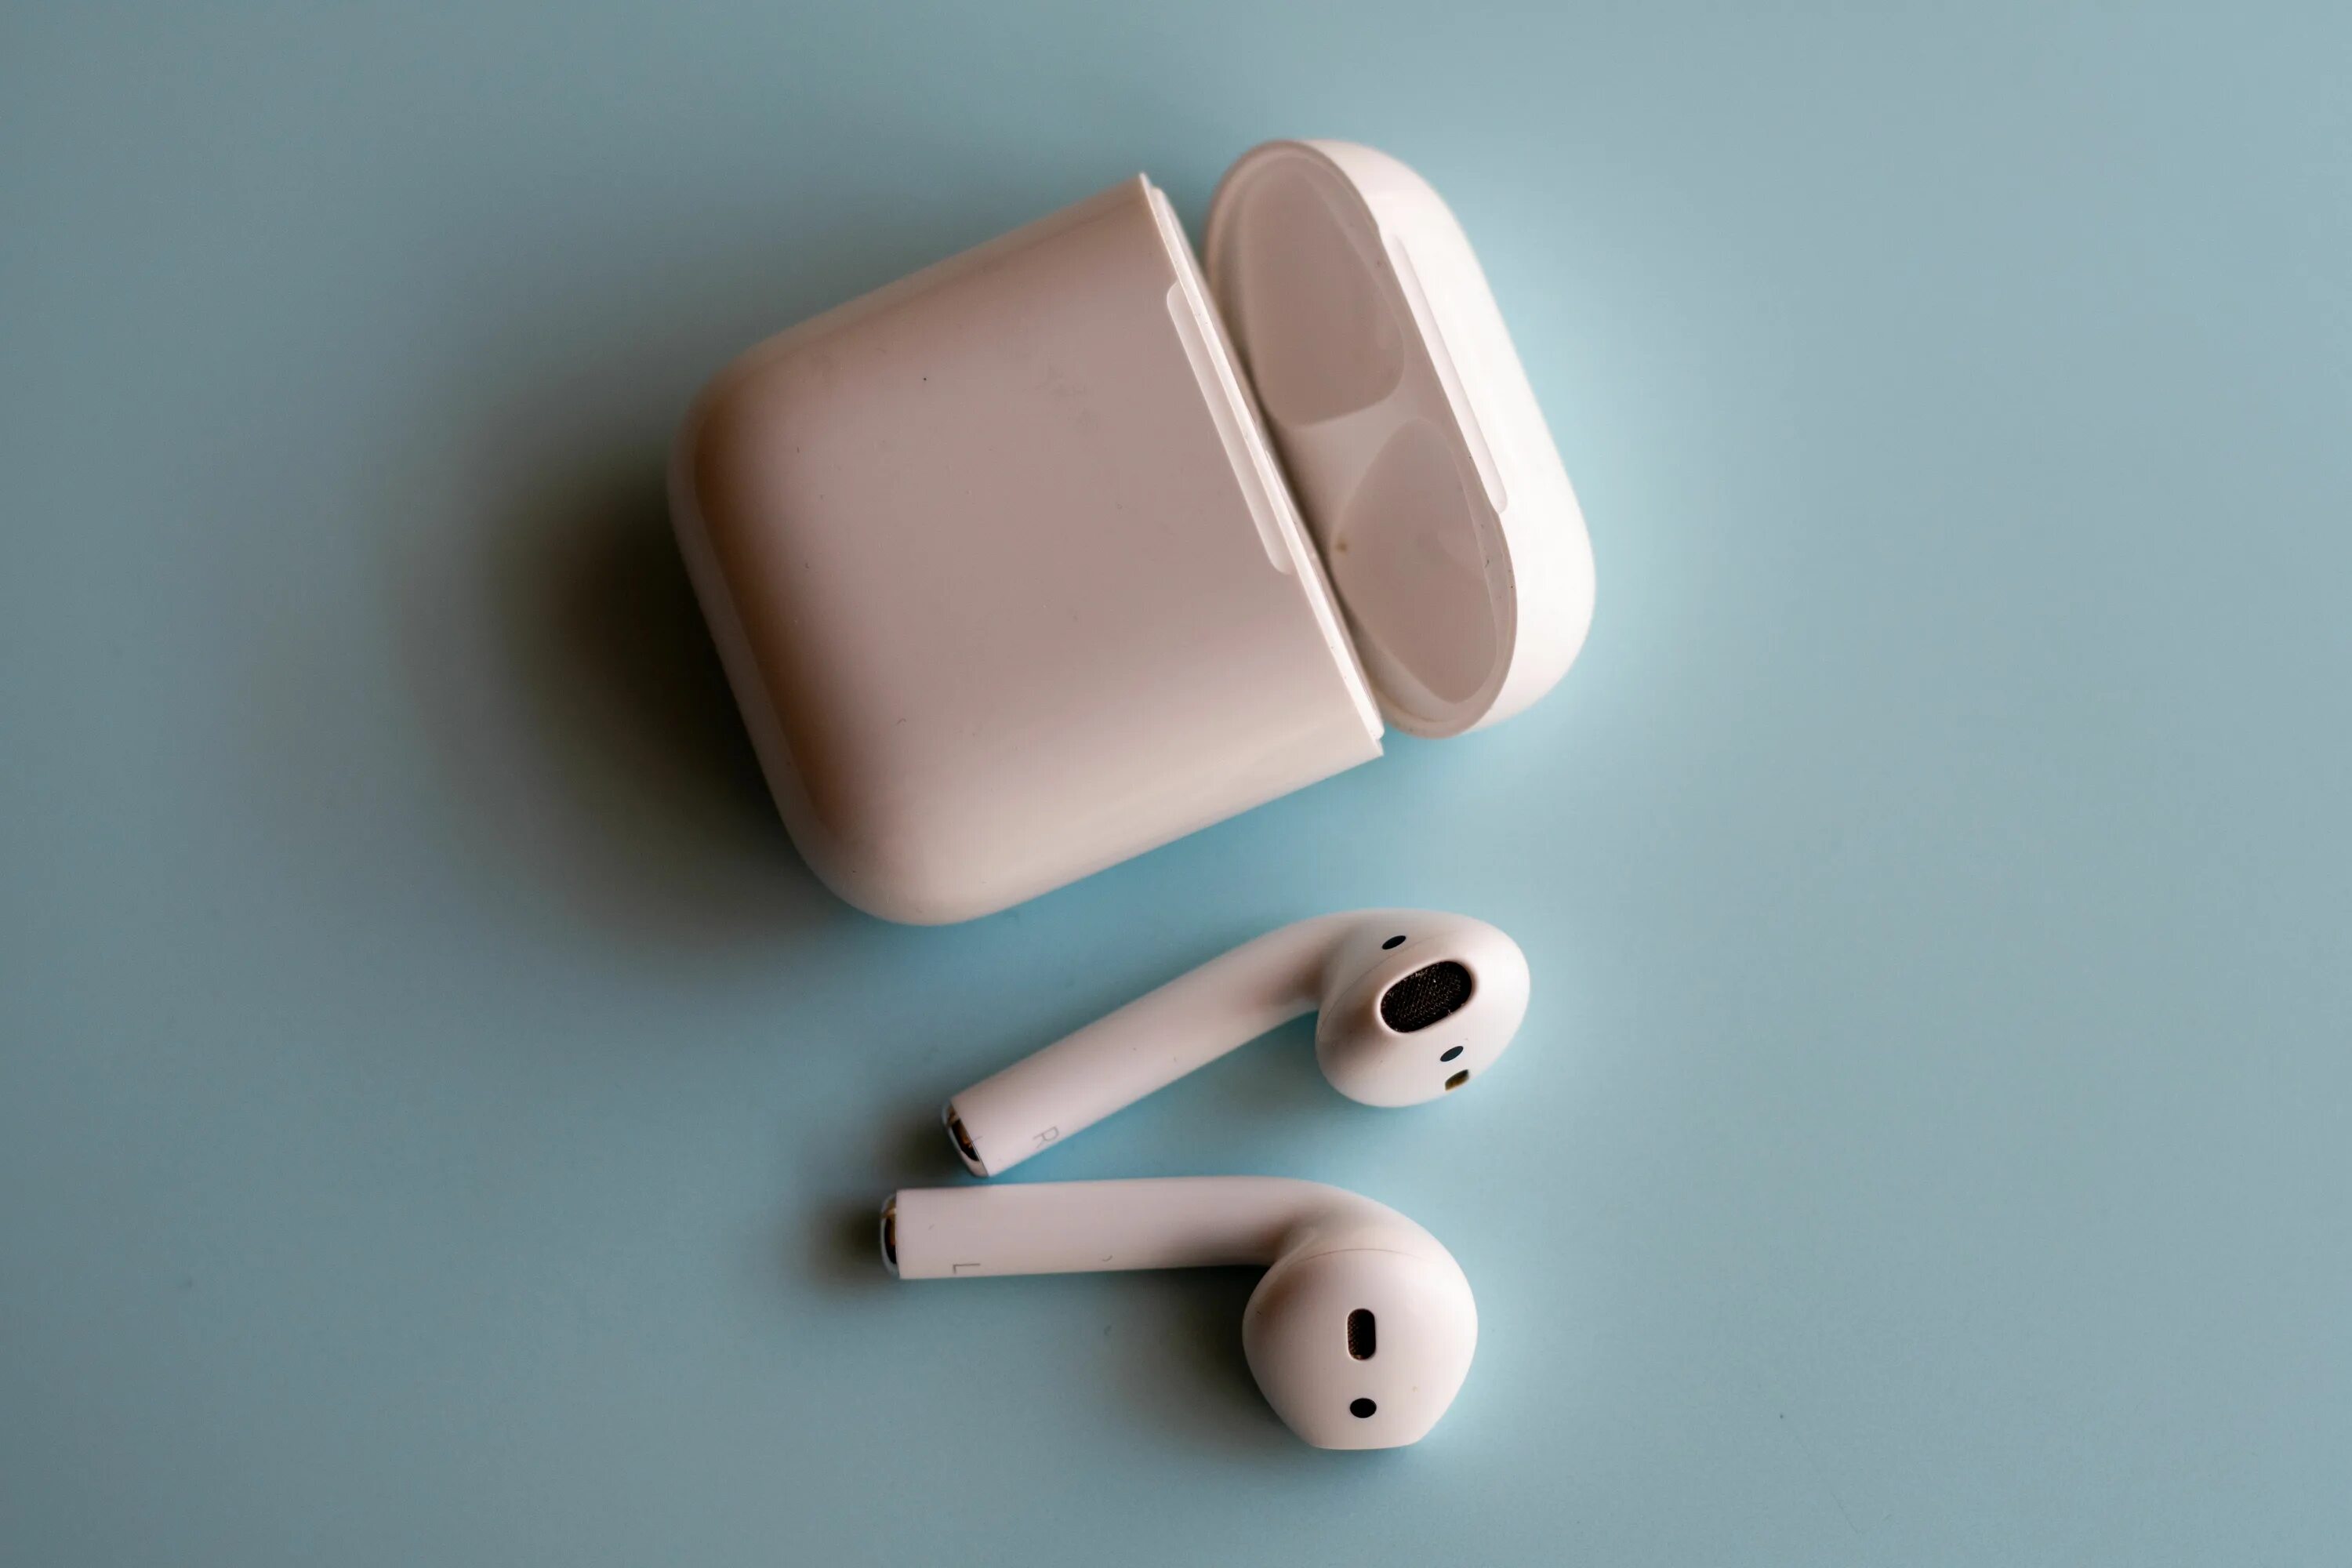 Airpods 2 gen. AIRPODS 2022. AIRPODS 2 Lux. AIRPODS 15. AIRPODS 3 Lux.